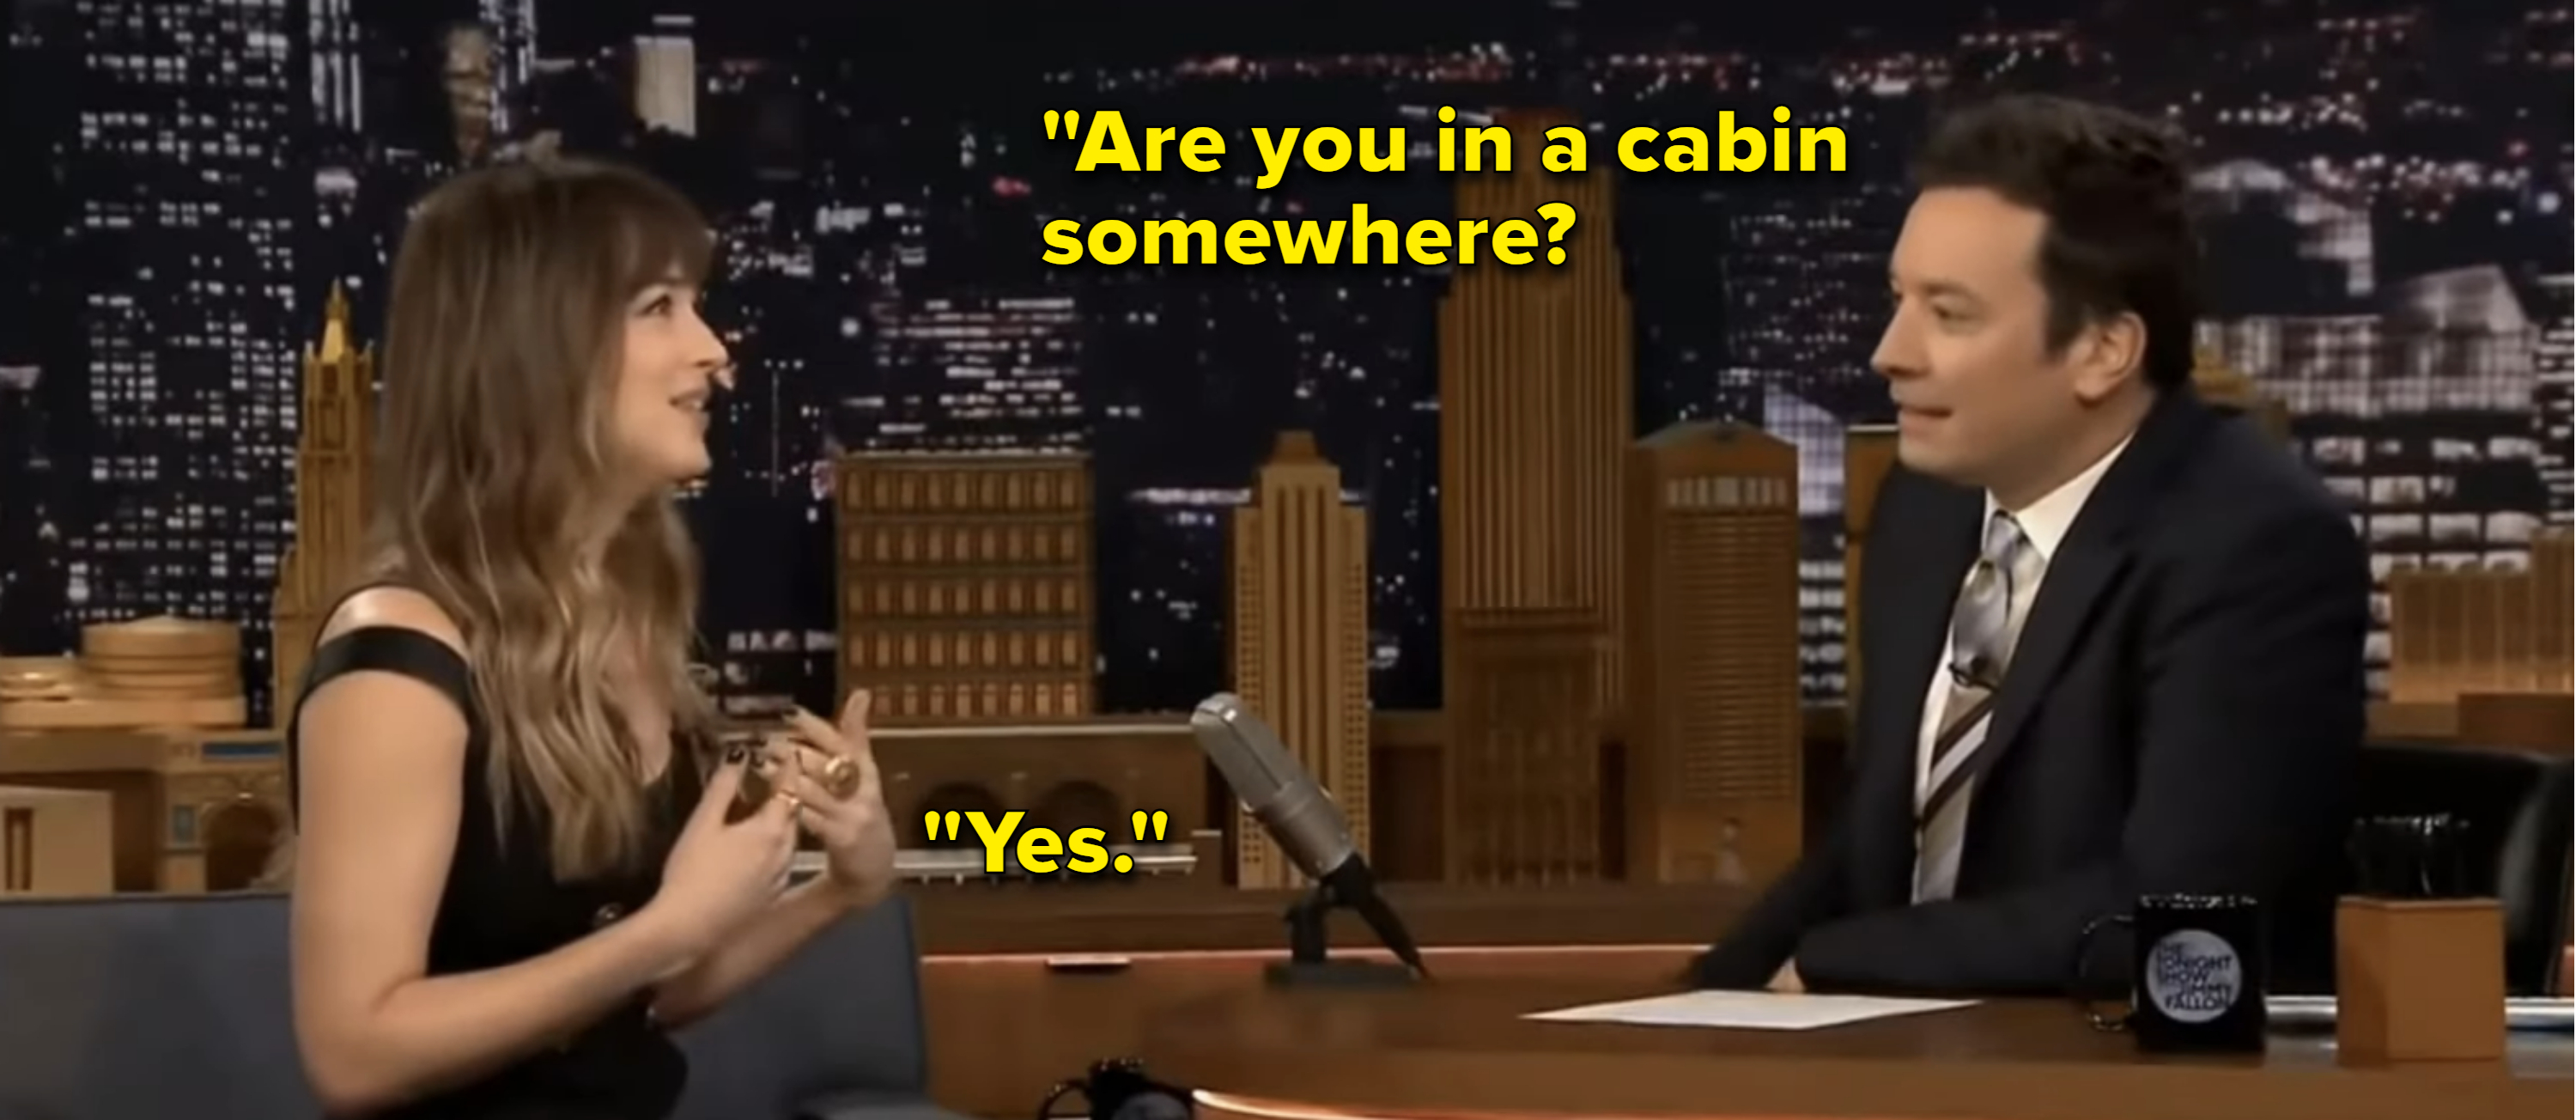 Jimmy asks Dakota Johnson &quot;Are you in a cabin somewhere?&quot; to which she replies &quot;Yes&quot;